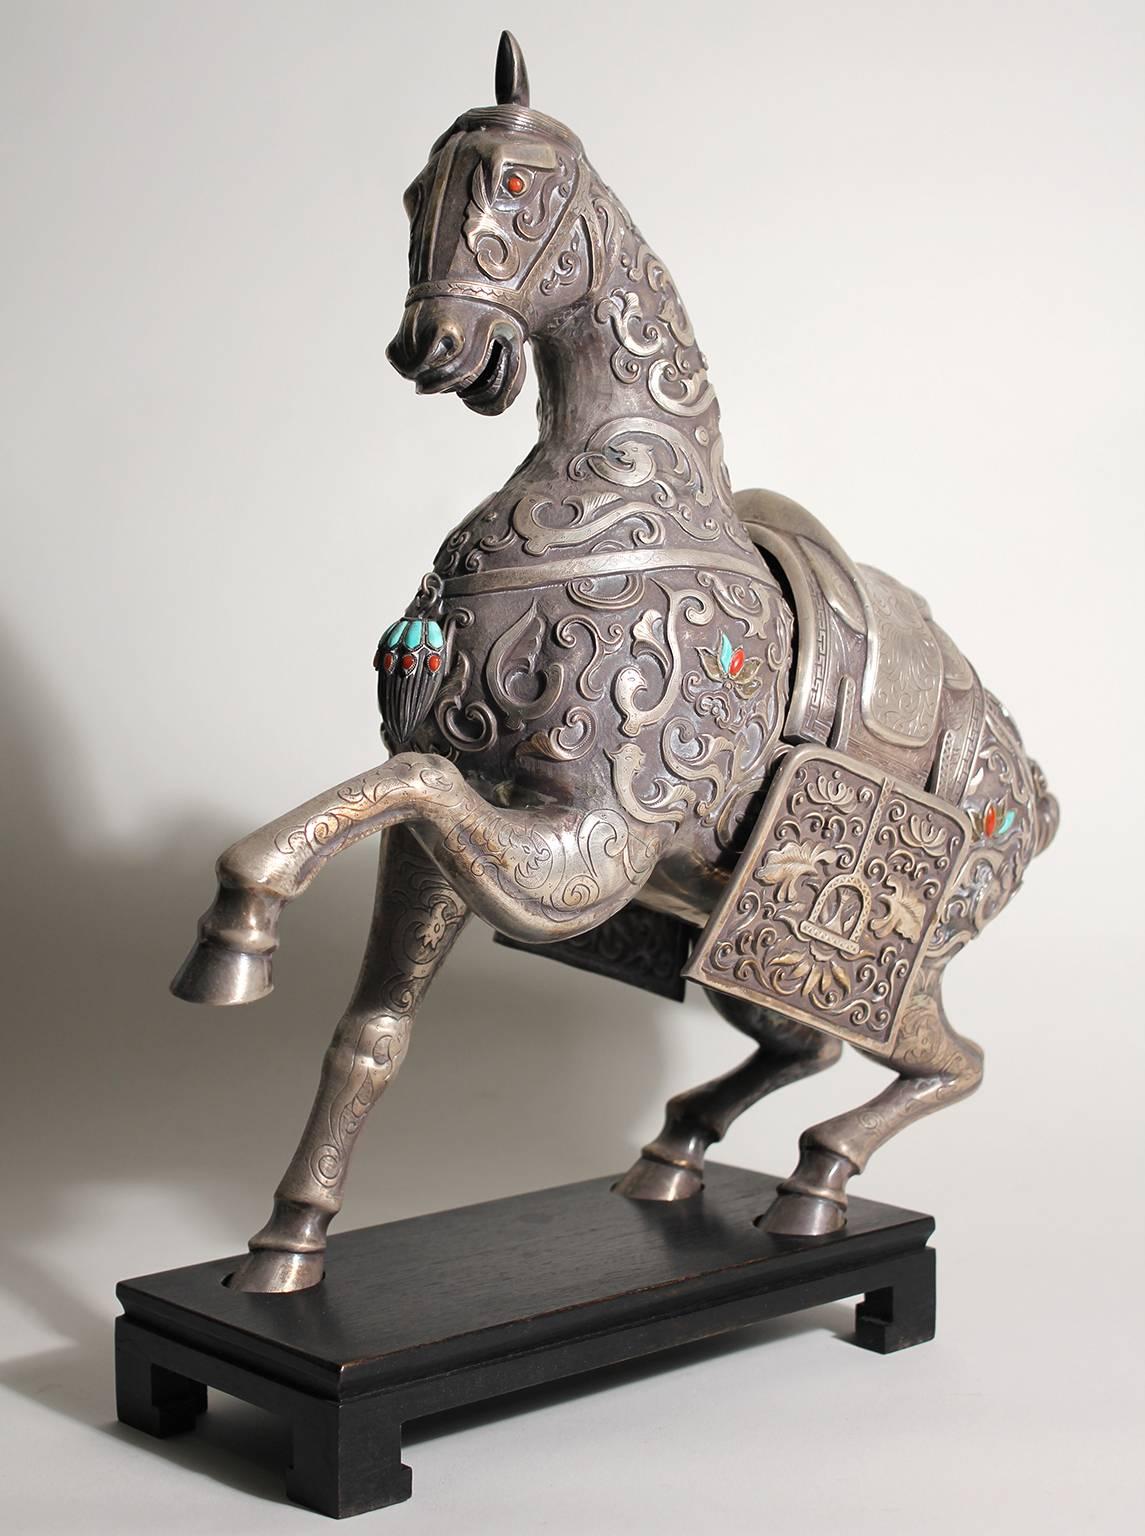 Monumental 19th century Chinese sterling silver horse statue sculpture censer. Weighs 44.95 troy ounces or 1398 grams of .925 sterling silver. Has the original wood stand. The horse figurine has inlaid natural turquoise and coral pieces as